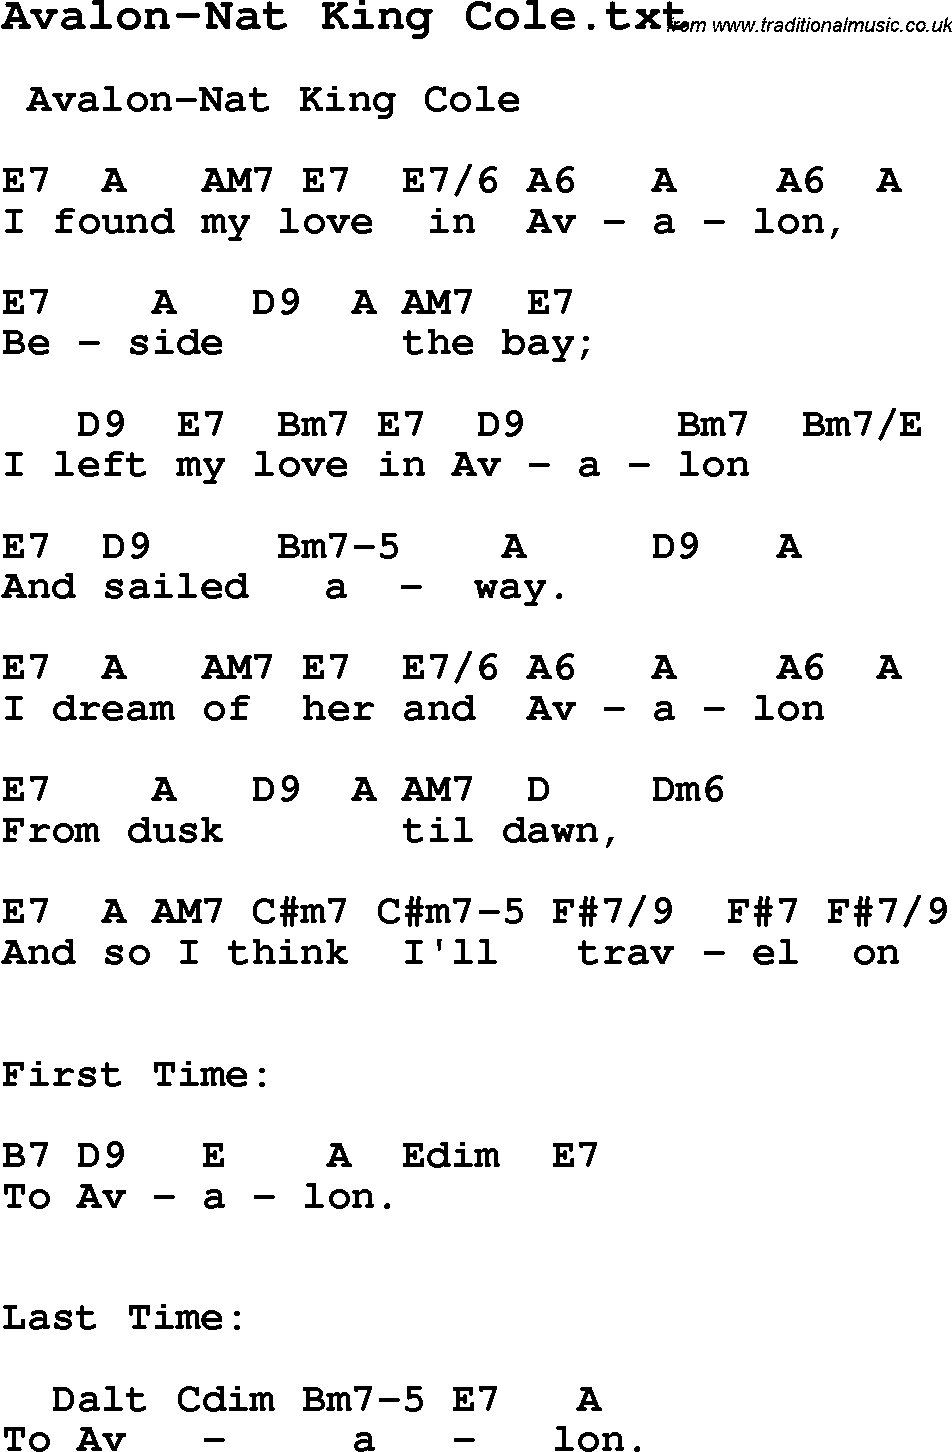 Jazz Song Avalon Nat King Cole With Chords Tabs And Lyrics From Top Bands And Artists